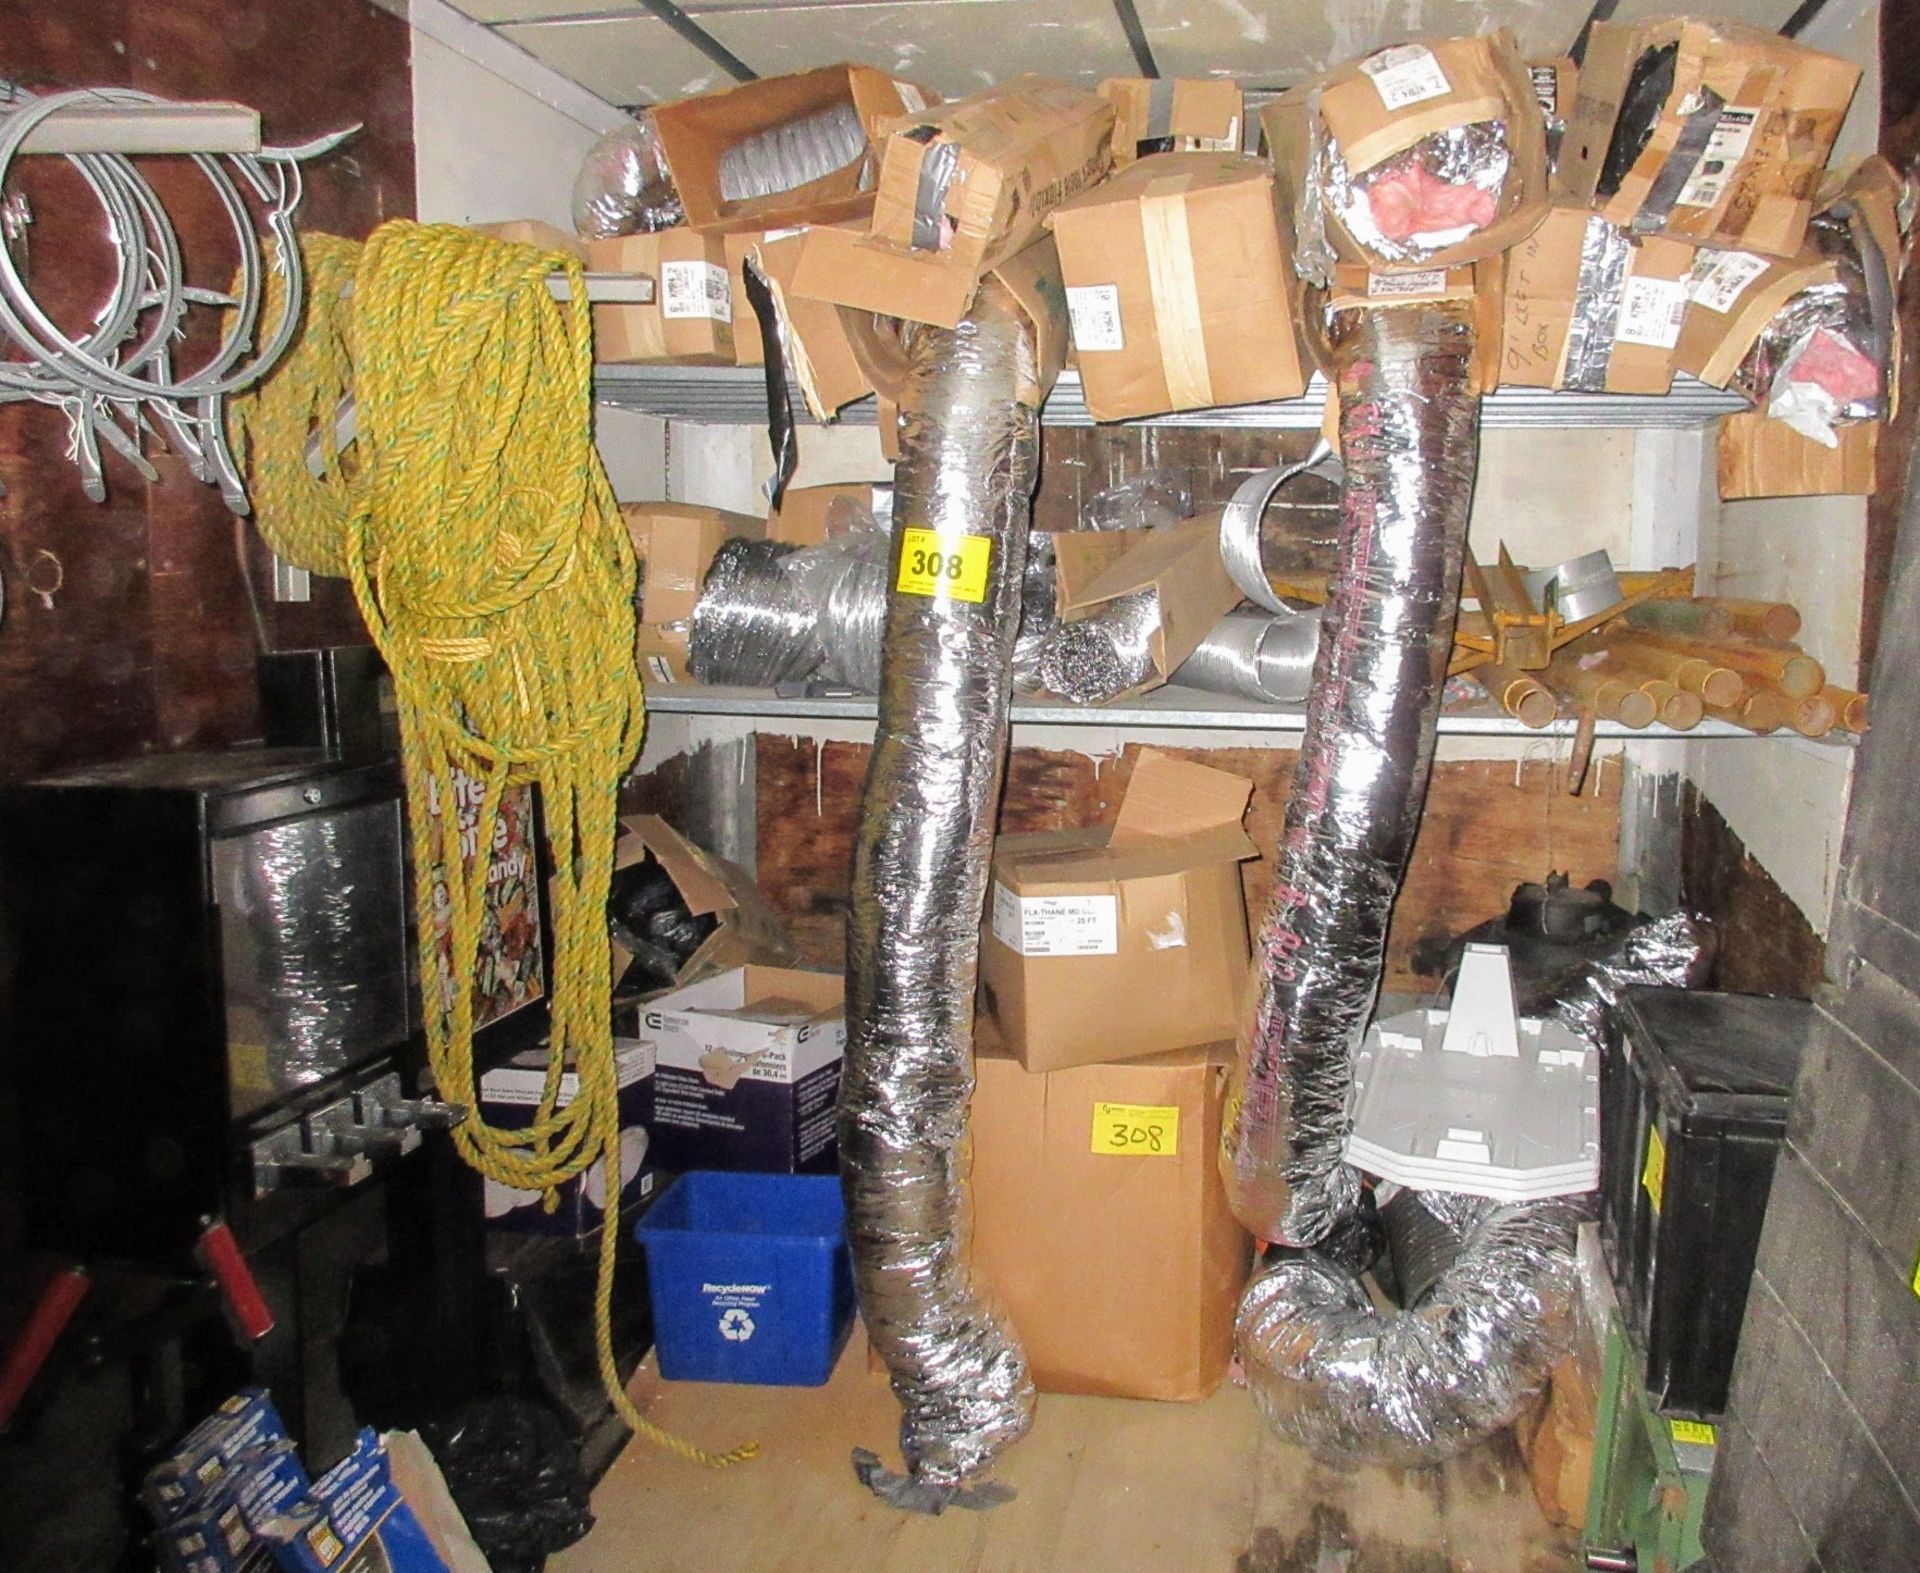 REMAINING CONTENTS OF TRAILER INCLUDING RIGGING ROPES, ROLLER STANDS, CANDY MACHINES, FLEX HOSE